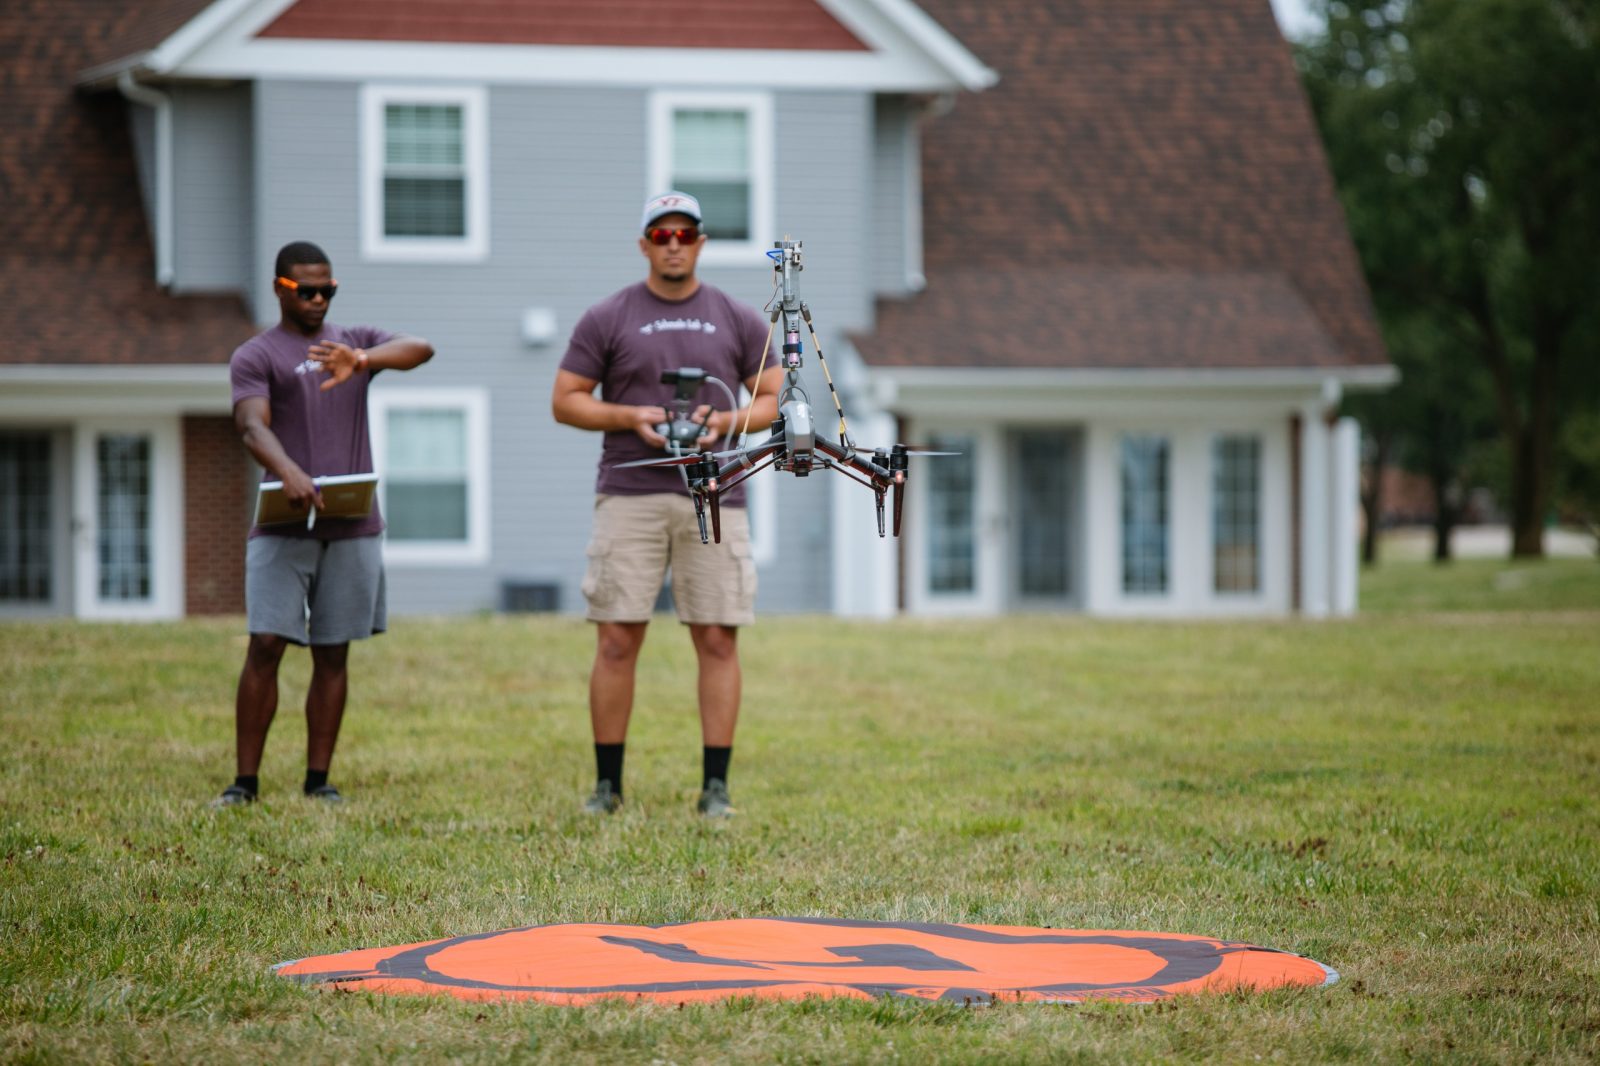 Undergraduate student Bryan Bloomfield (left) from Morehouse College examines his watch as David Schmale (right) in manning a sensor-mounted drone. An orange circle with an "H" is located underneath the hovering drone. Courtesy of Christina+David.